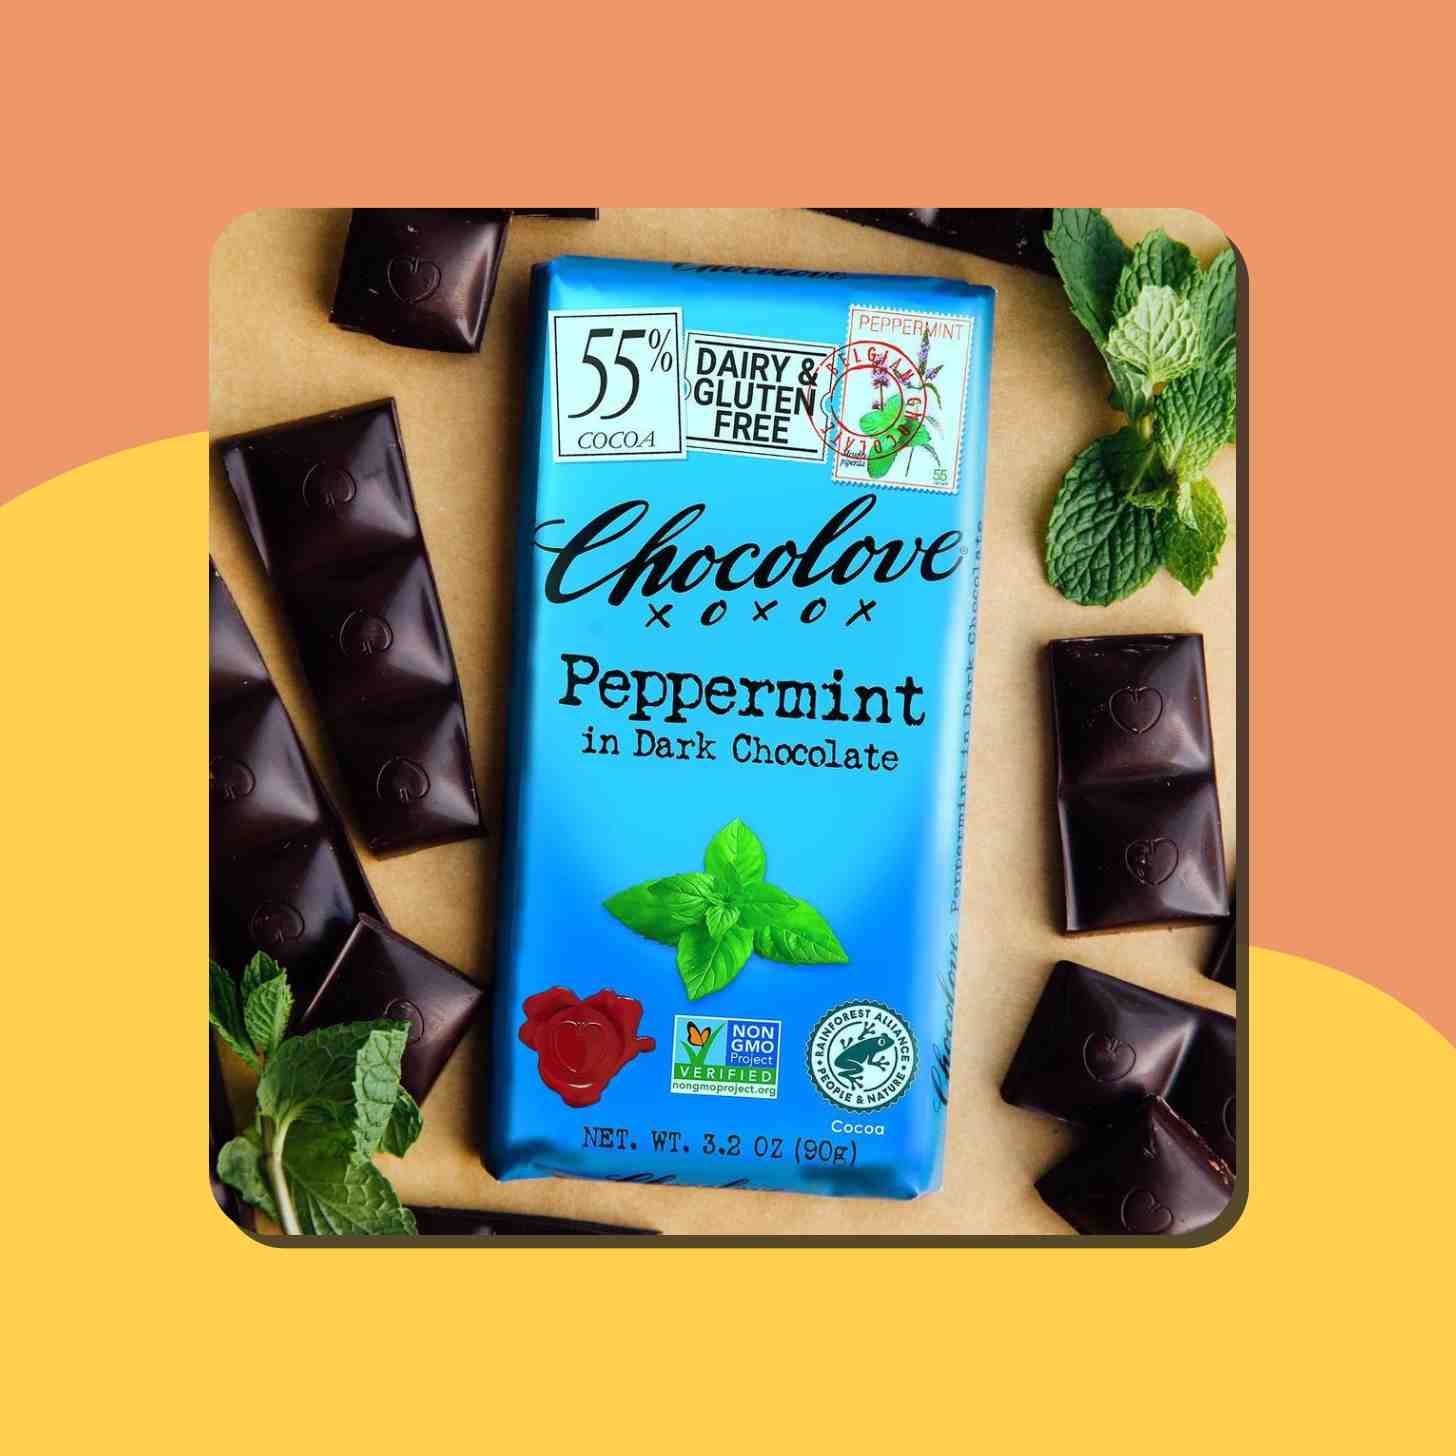 A Box Of Chocolove Peppermint Dark Chocolate Sorrounded By Chocolate